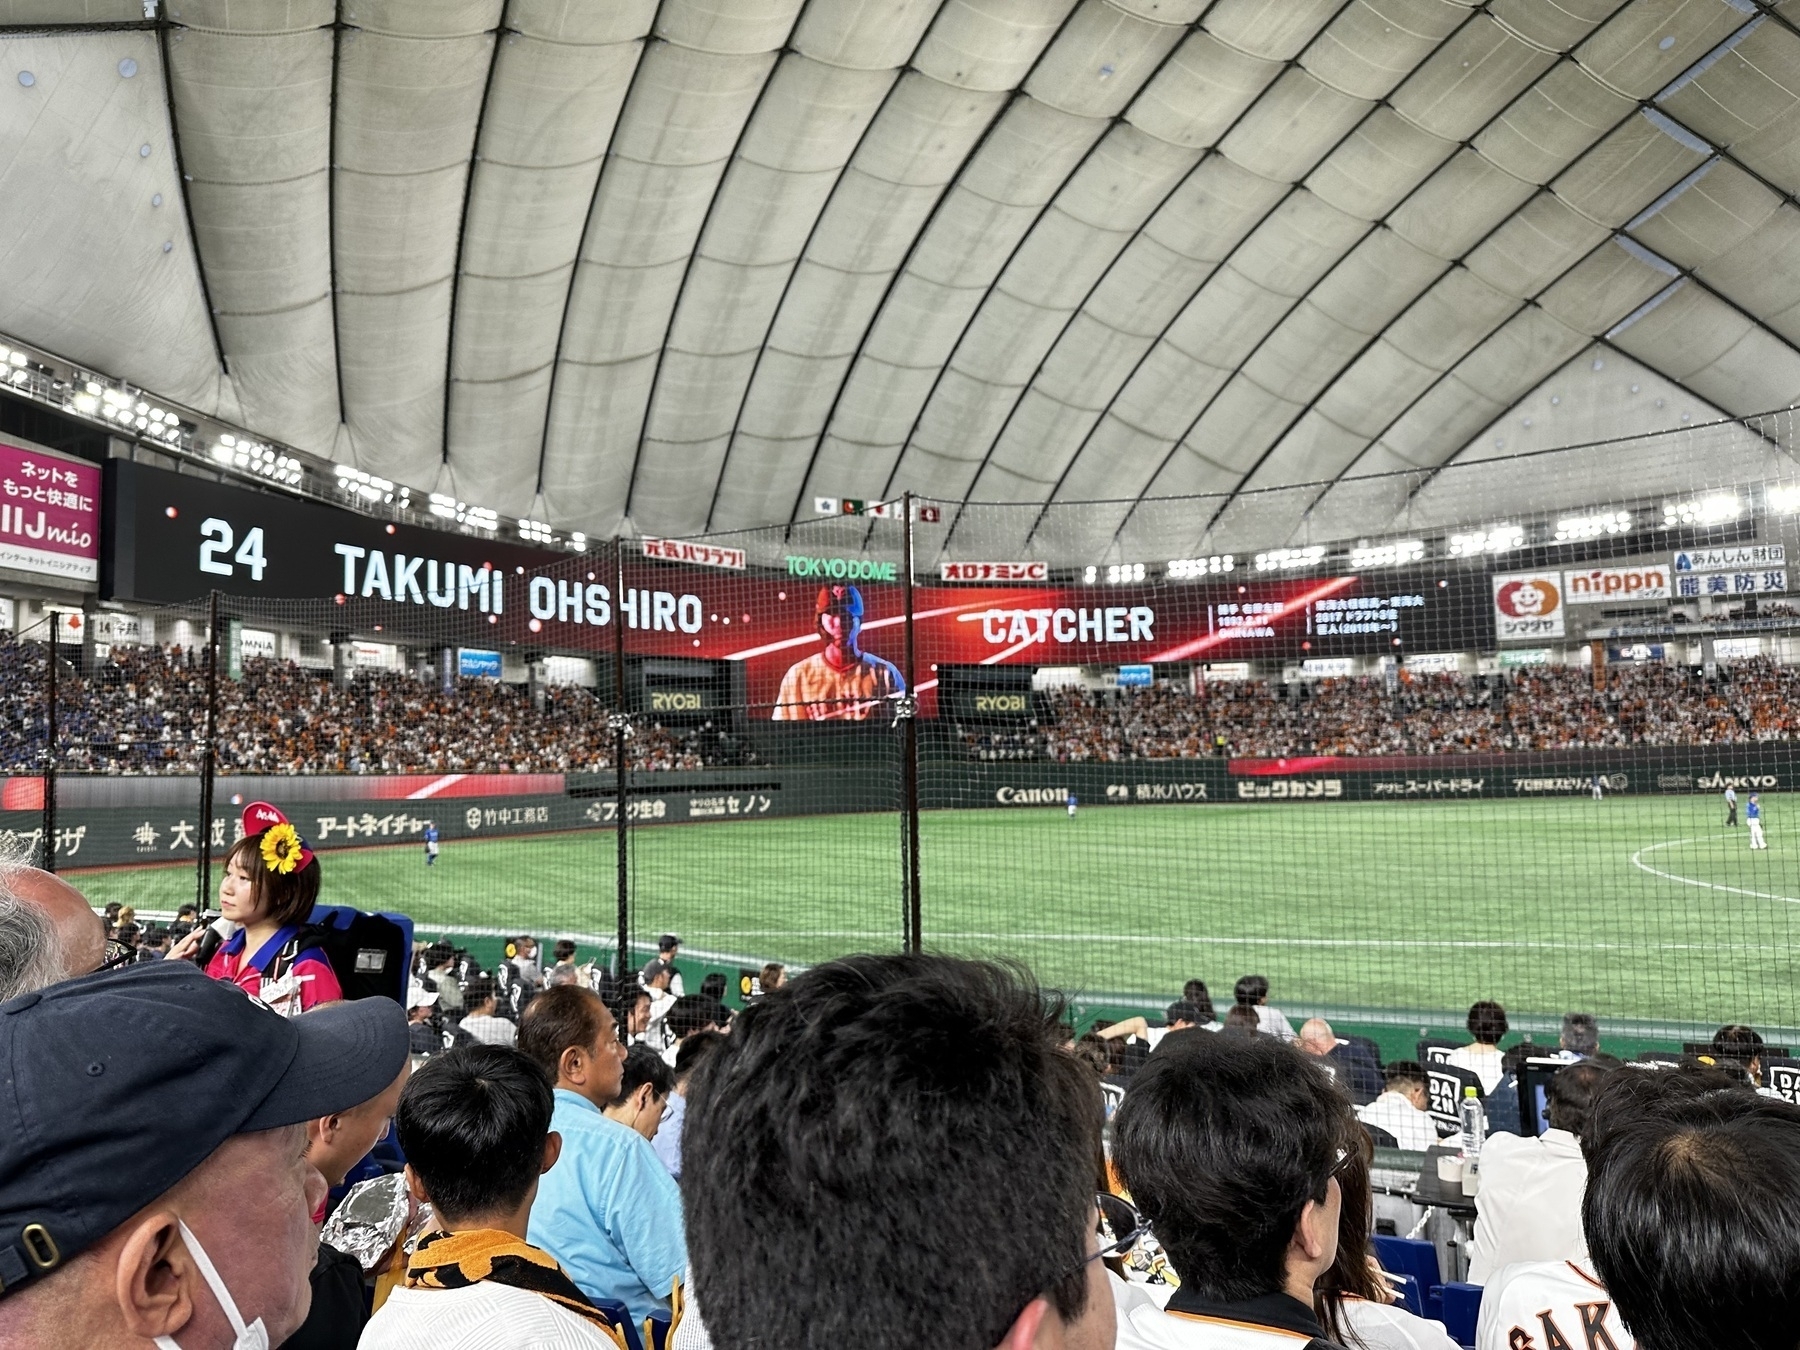 Tokyo dome outfield during baseball game